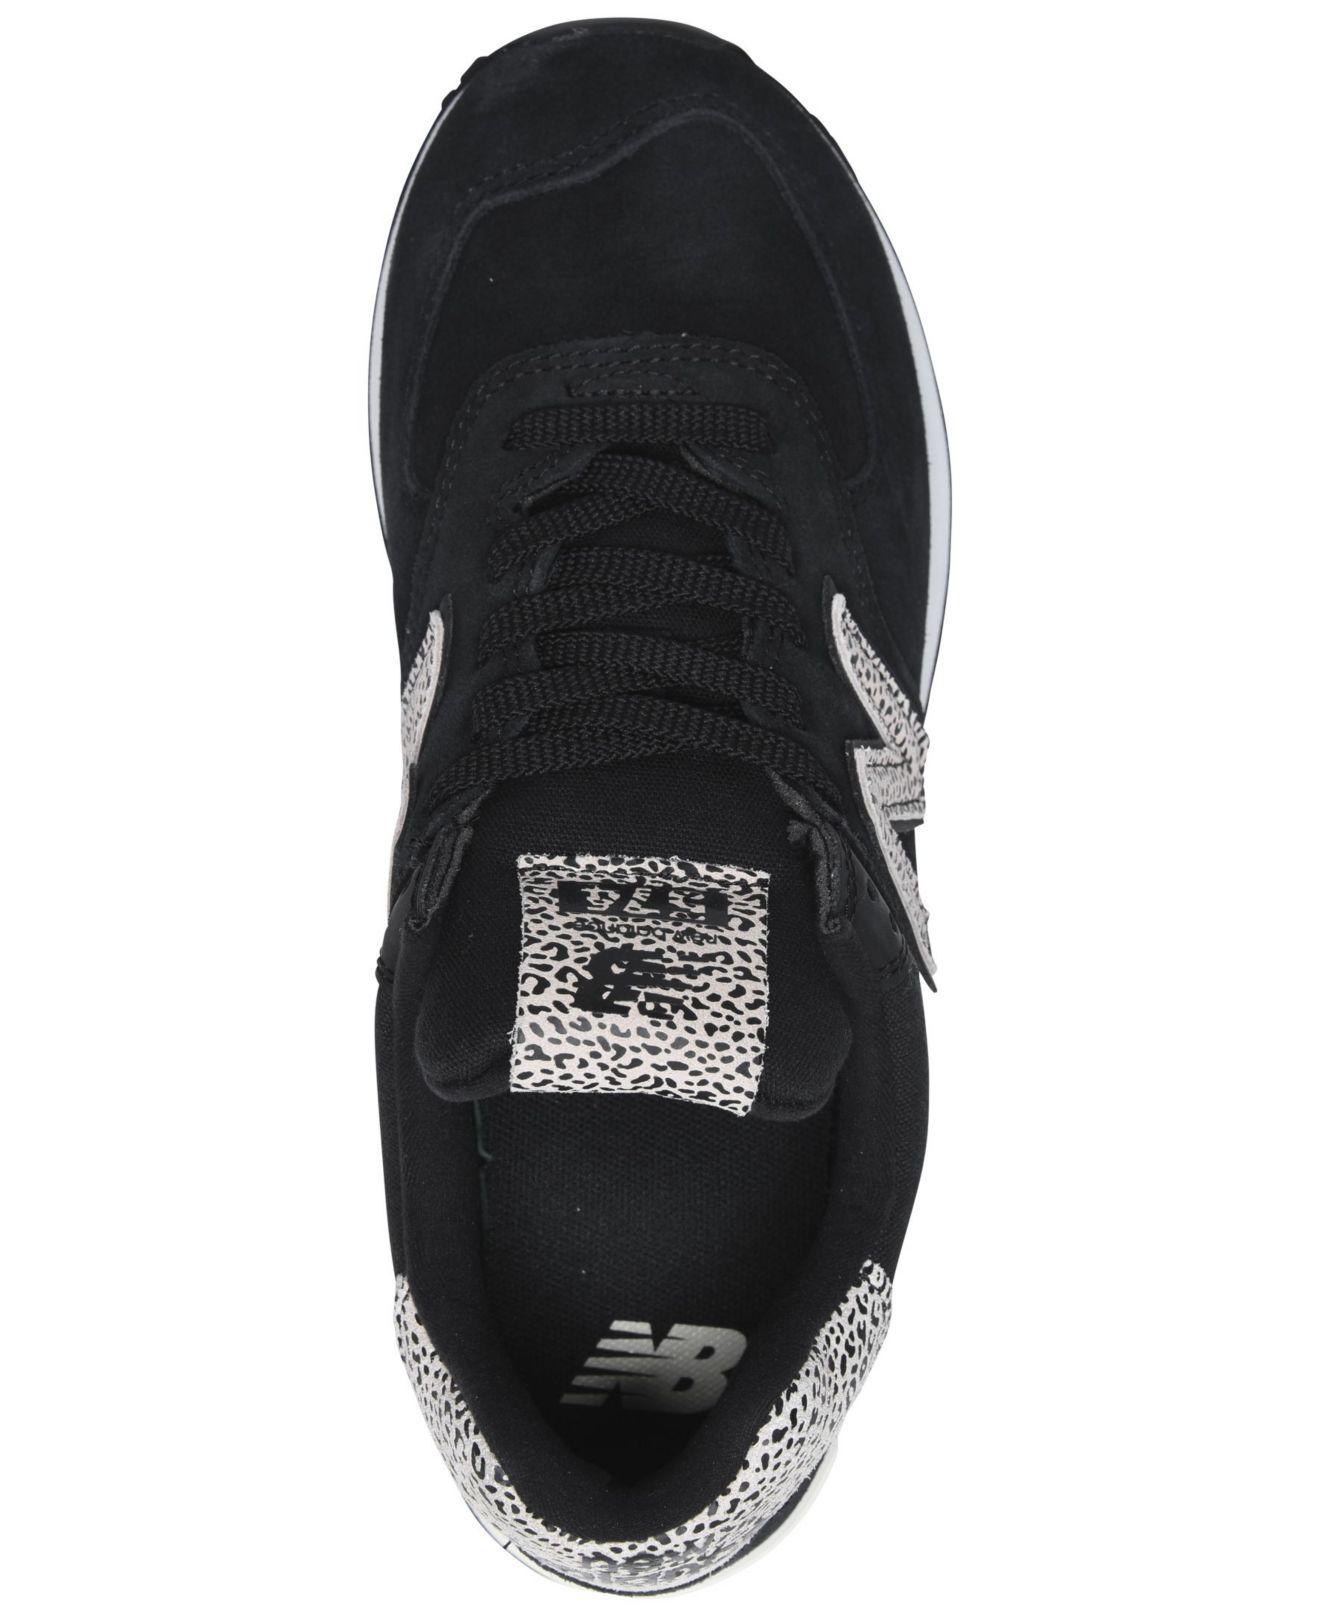 New Balance 574 Leopard Casual Sneakers From Finish Line in Black | Lyst